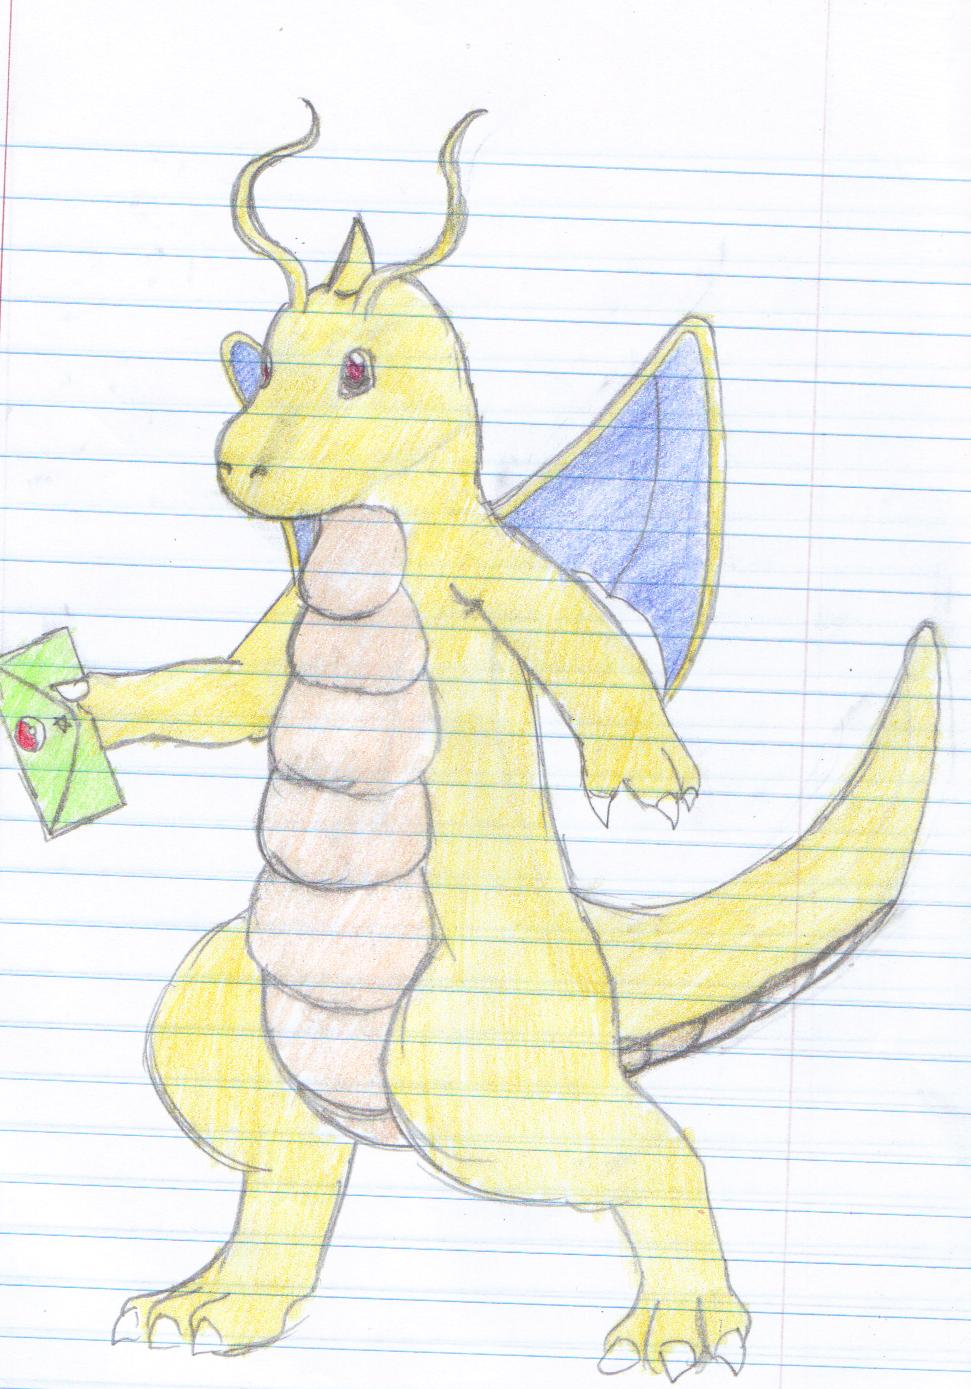 Ashley's Dragonite by wolverinedeathmaster14